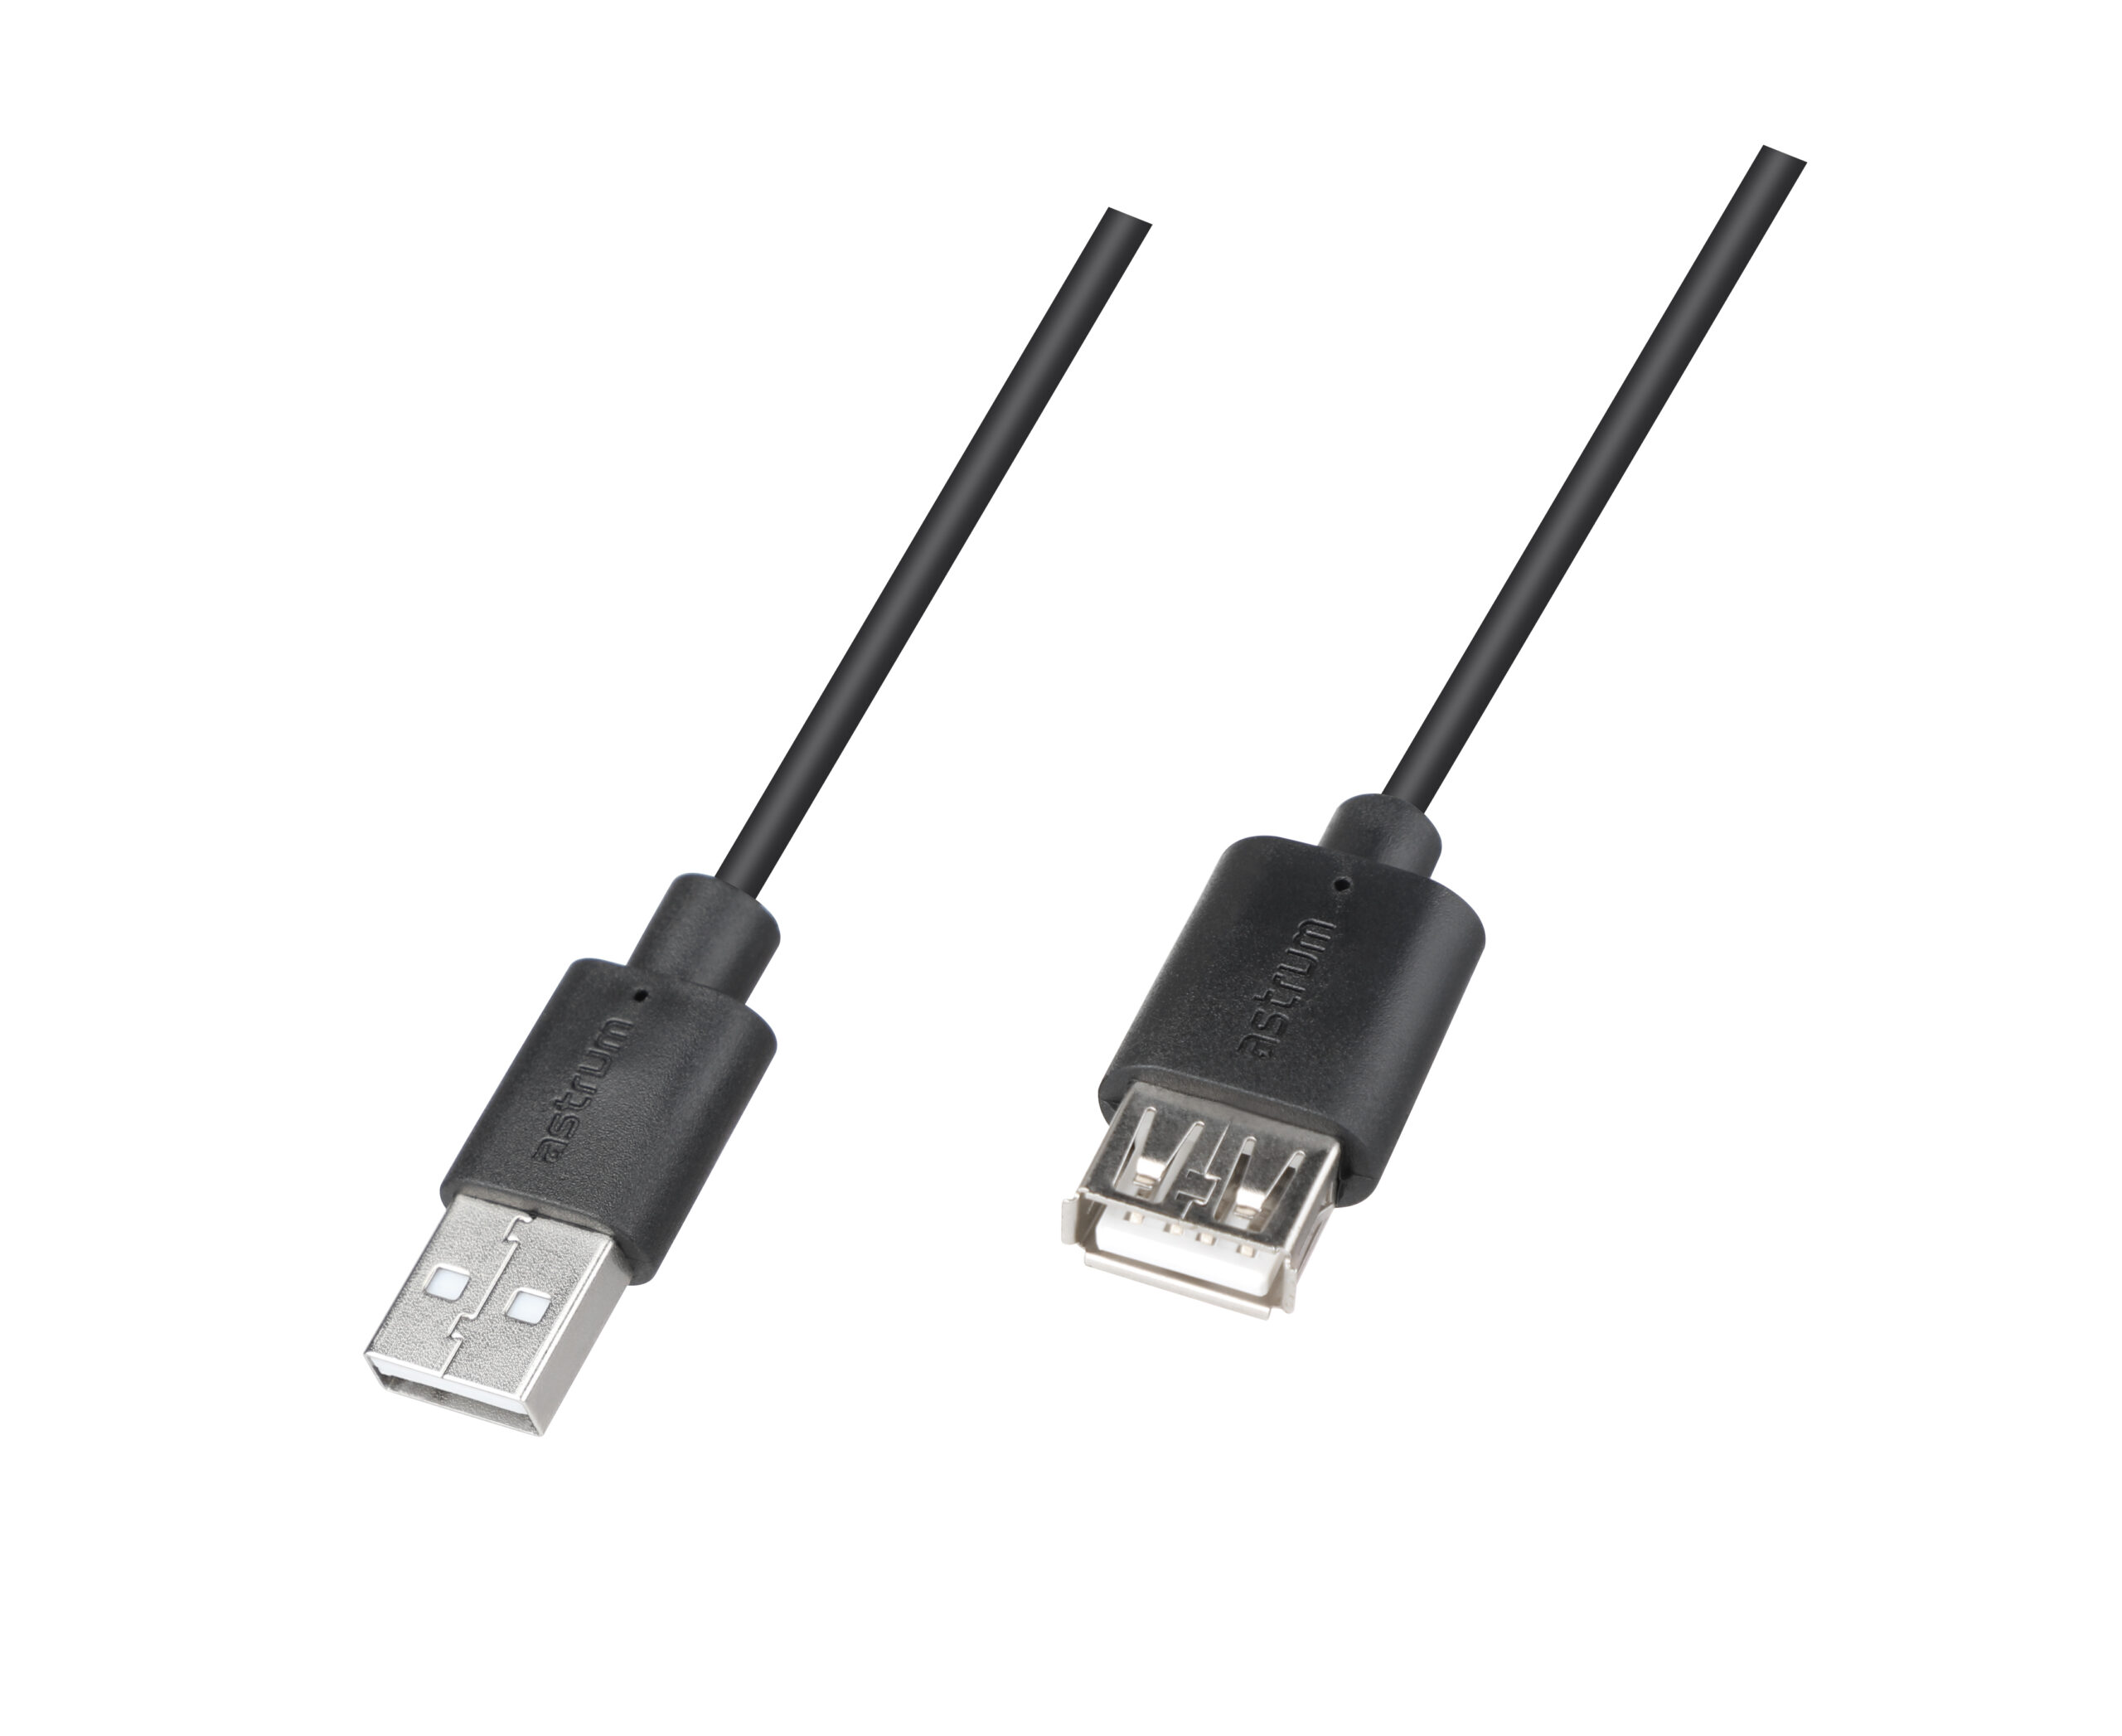 UE201 USB 2.0 Male to Female 1.8m Extension Cable